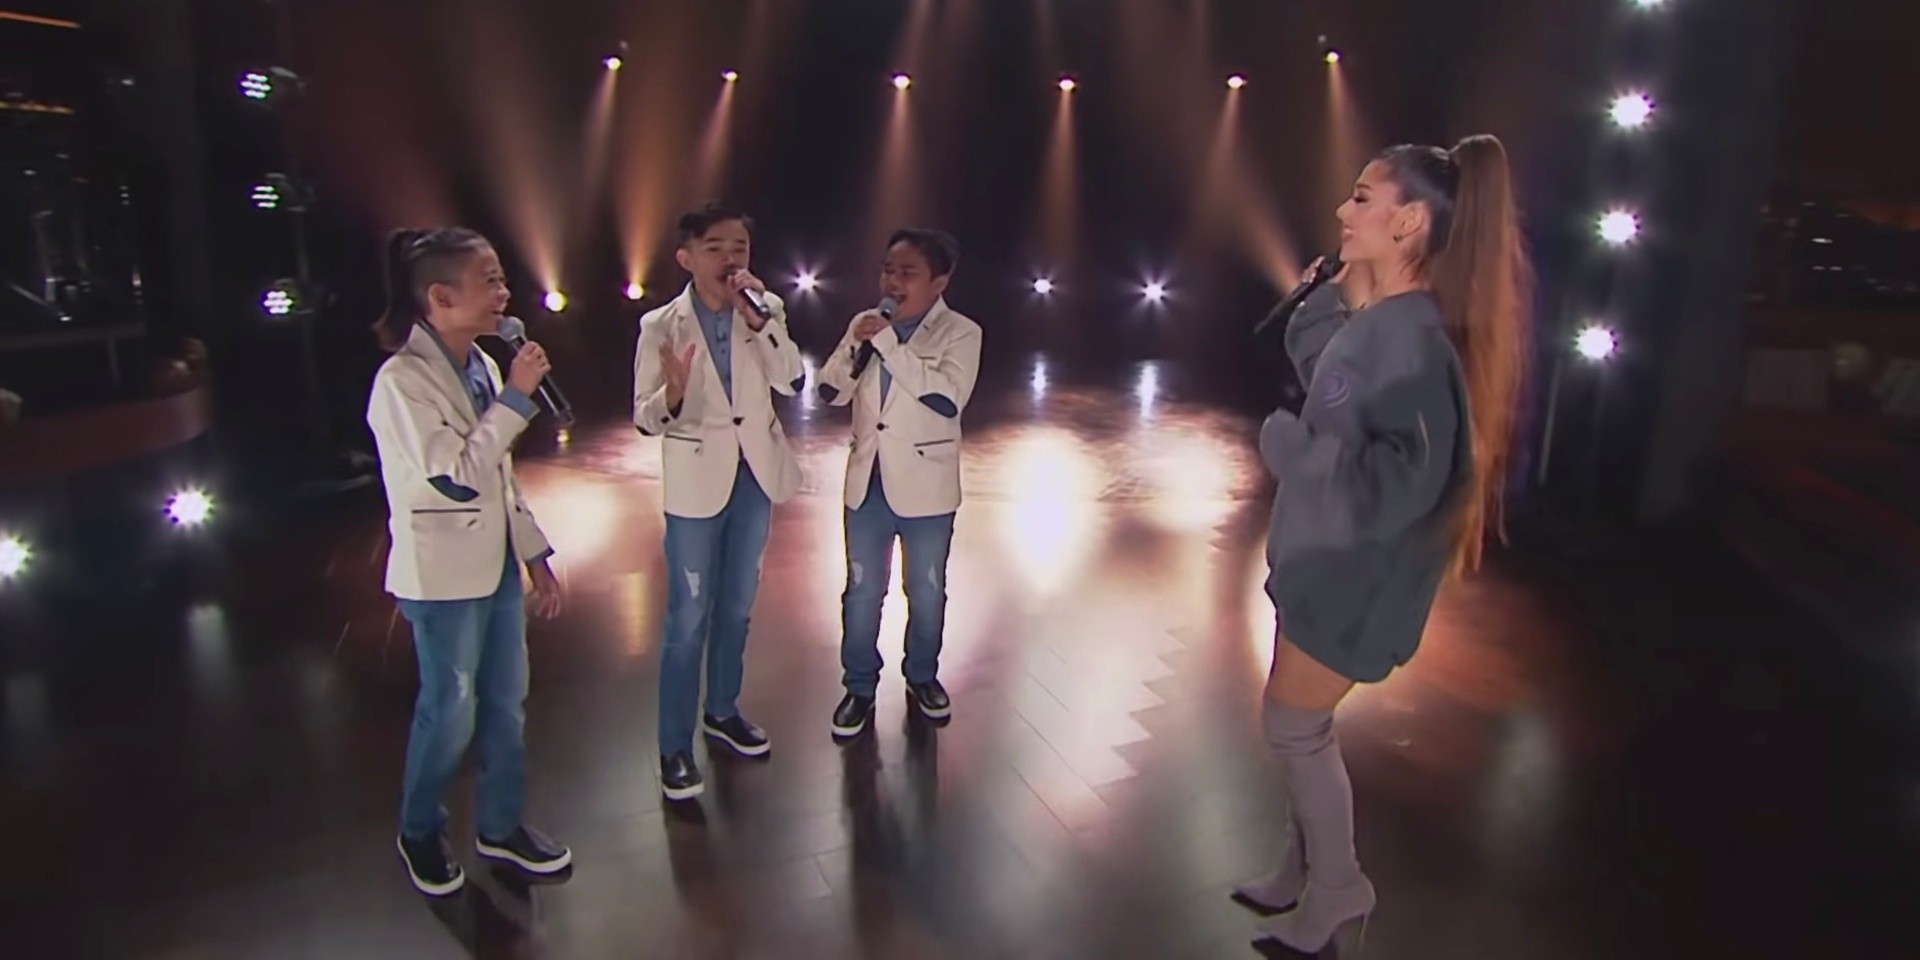 TNT Boys perform with Ariana Grande on The Late Late Show with James Corden  – watch